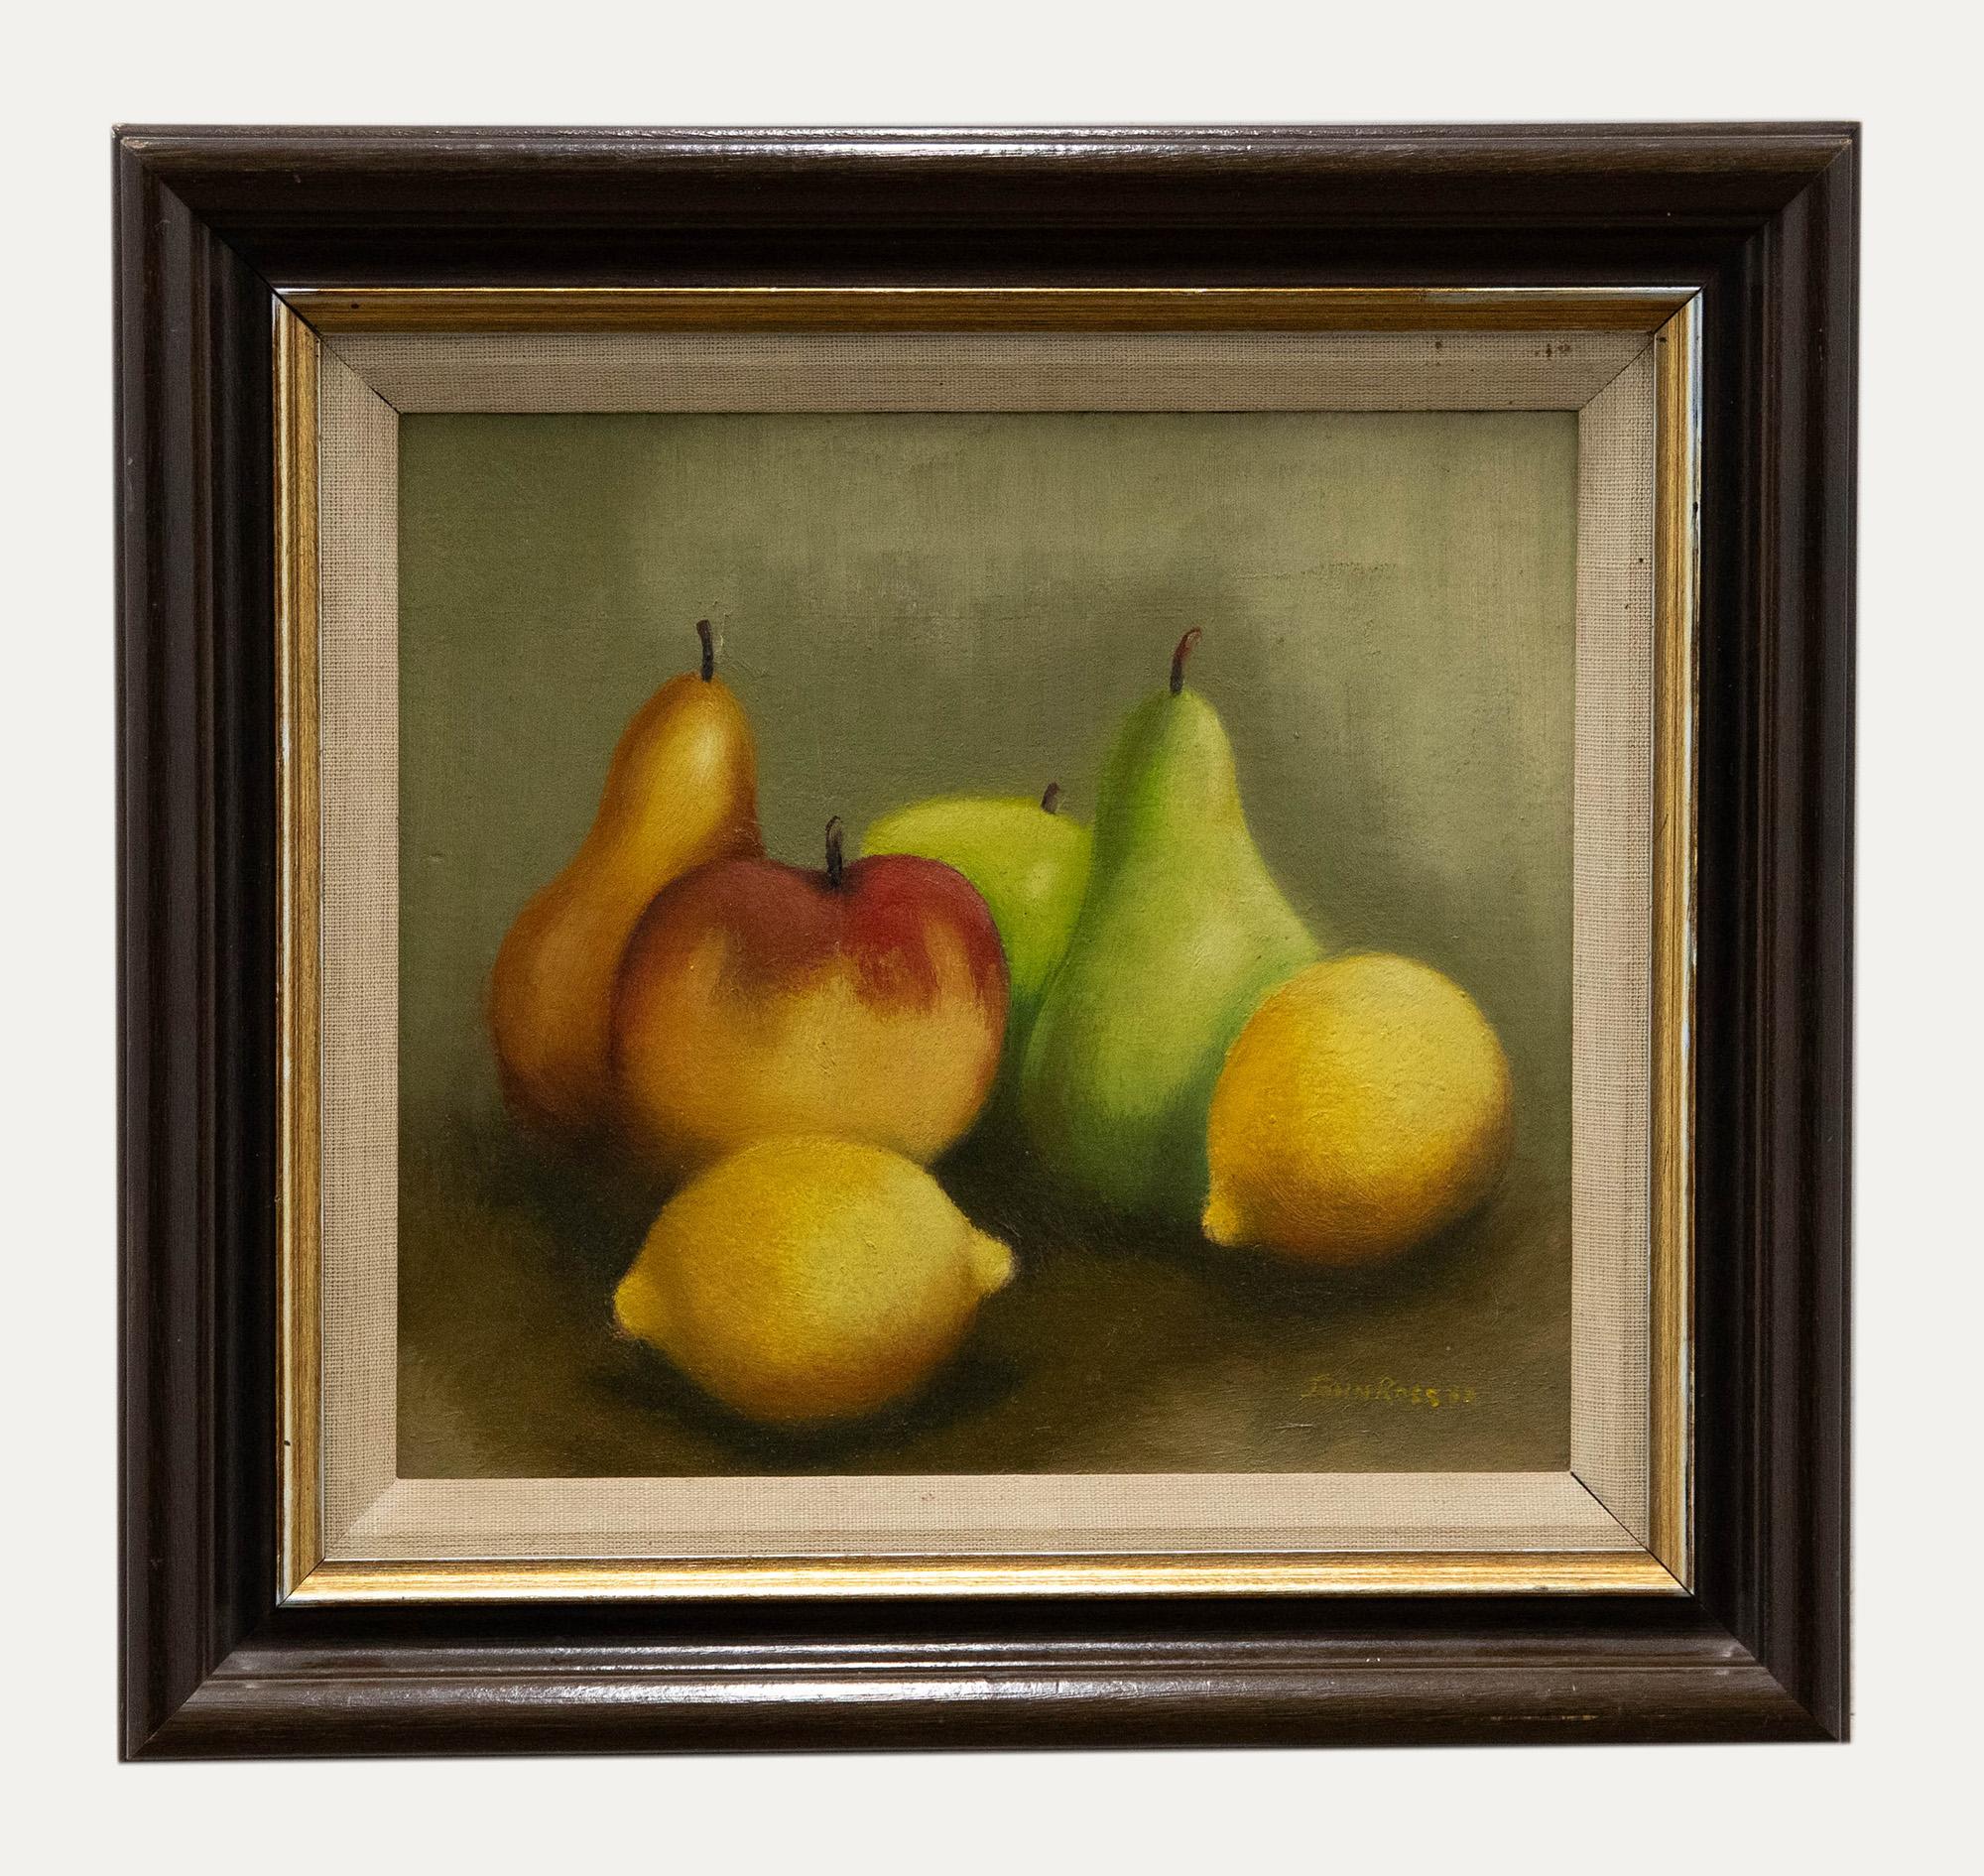 An original oil painting by John Ross. Signed to the lower right. Well-presented in a dark wood frame with a gilt-effect window and linen slip. On board.